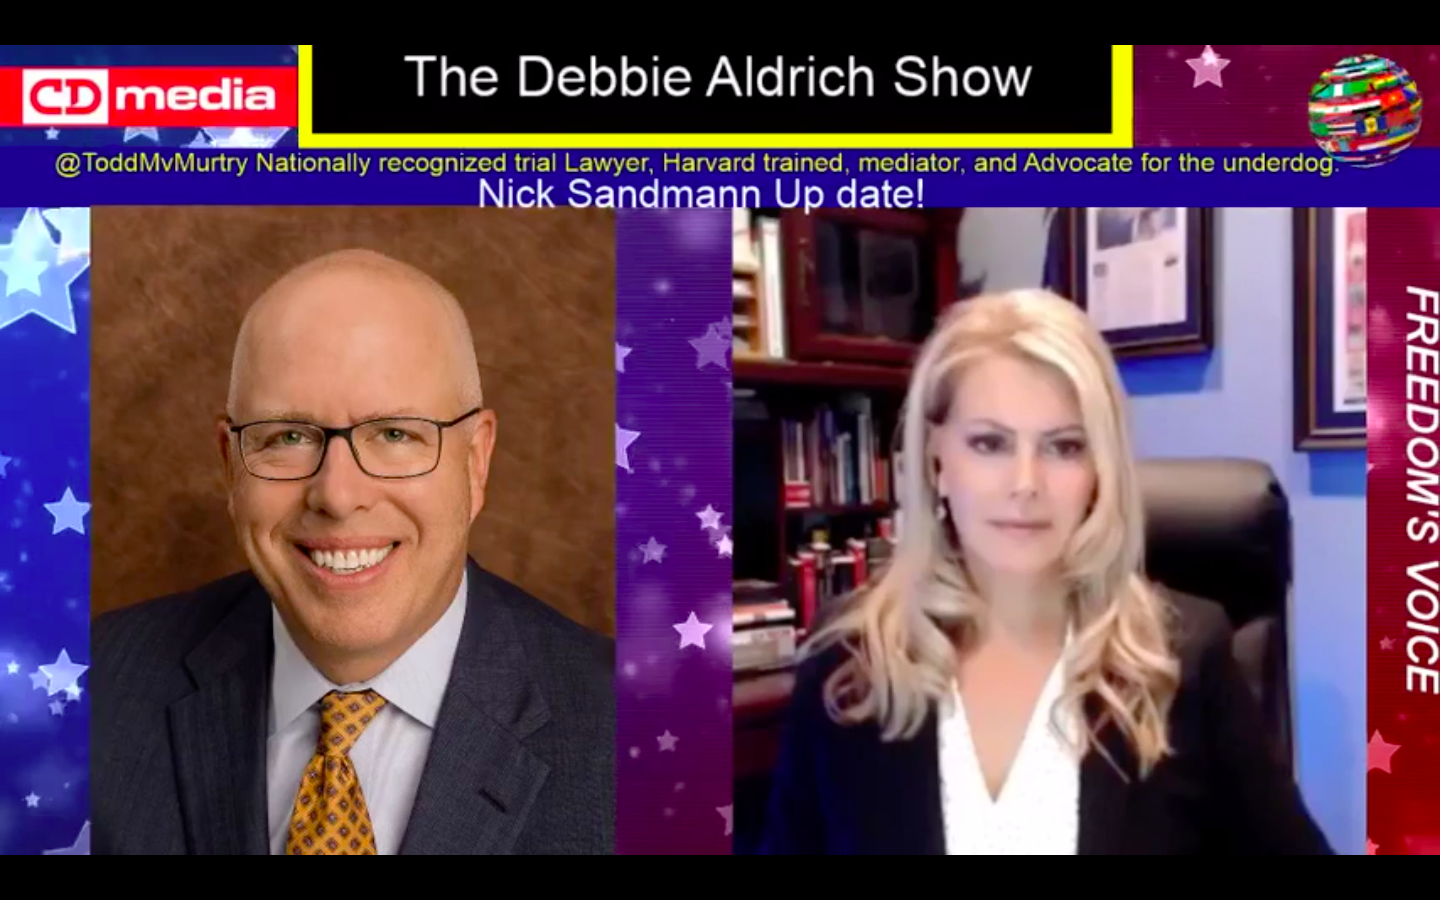 Debbie Aldrich With Todd McMurtry Trial lawyer, Advocate Discussing The Nick Sandmann Case And Kentucky Election